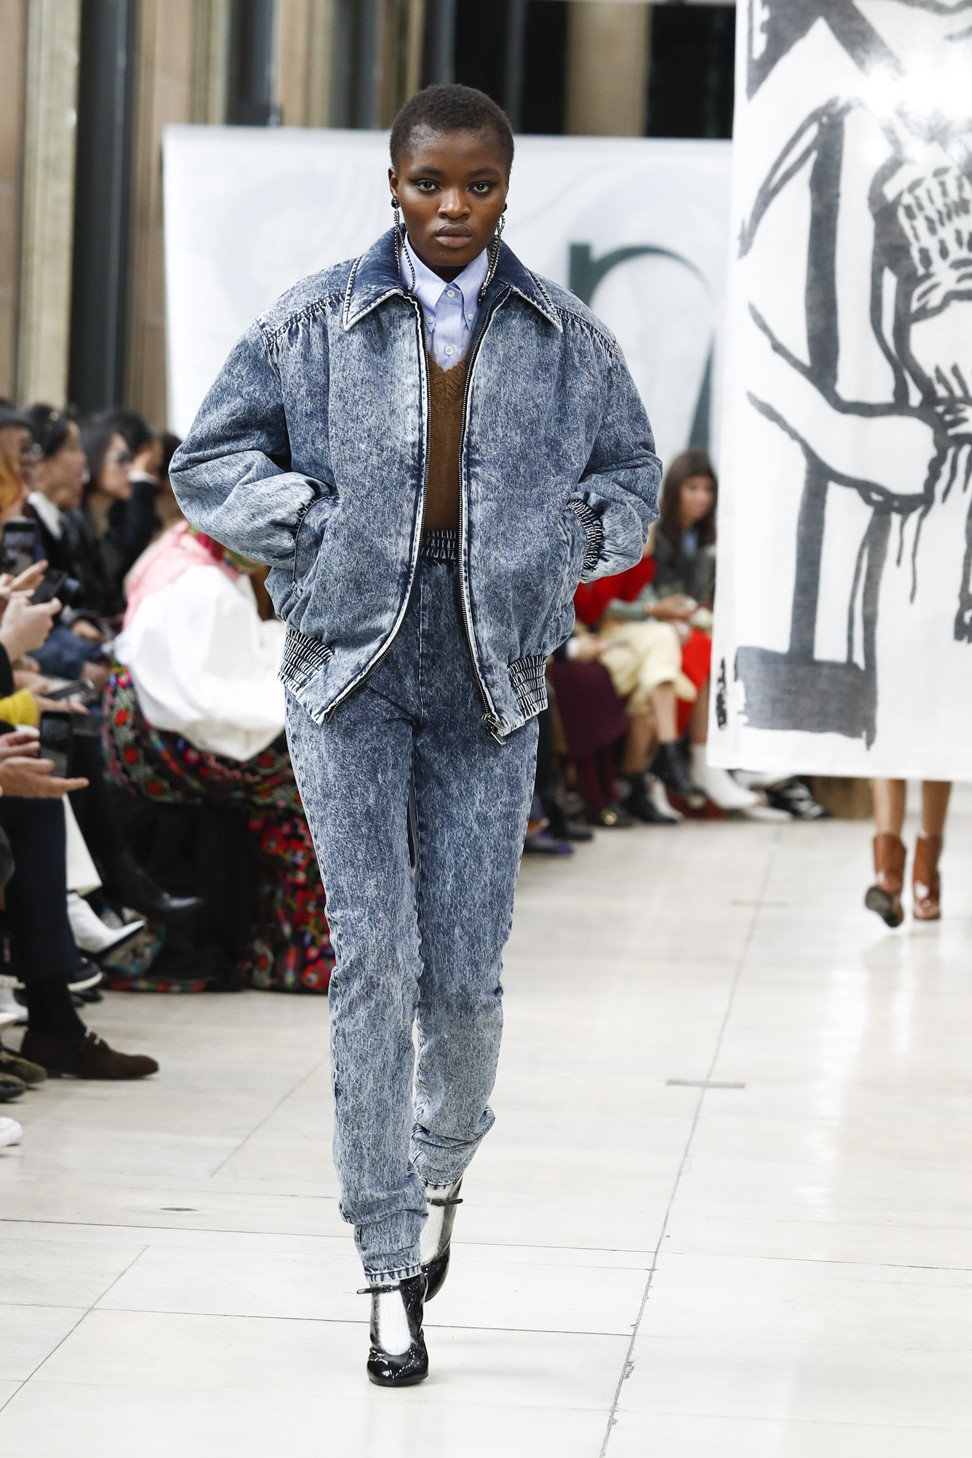 A double-denim look from Miu Miu’s autumn/winter collection.